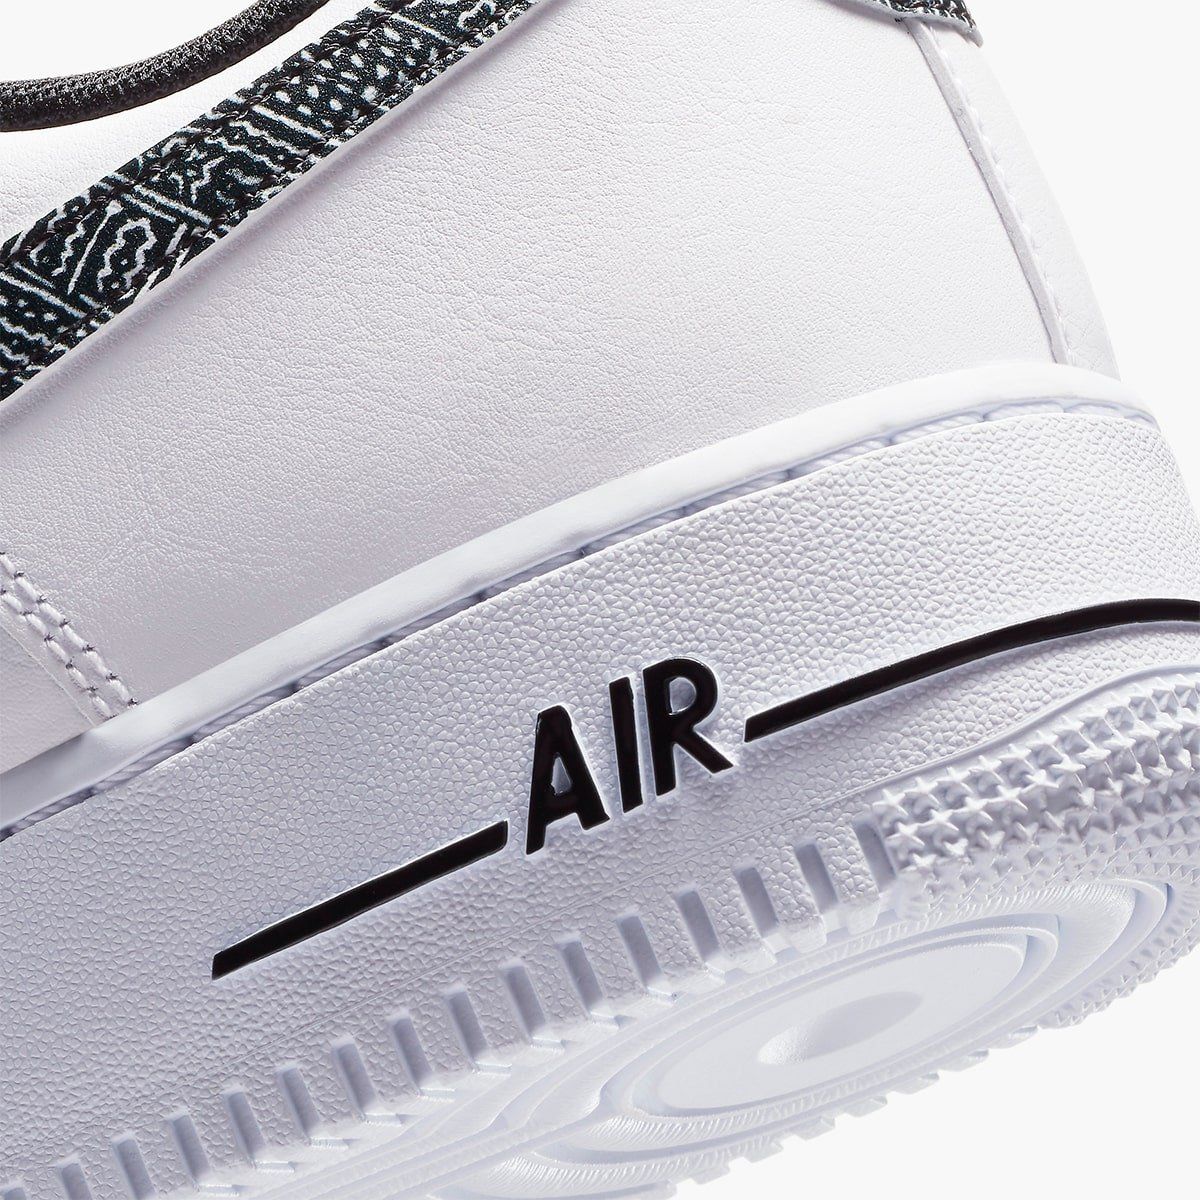 Available Now // Air Force 1 Low 